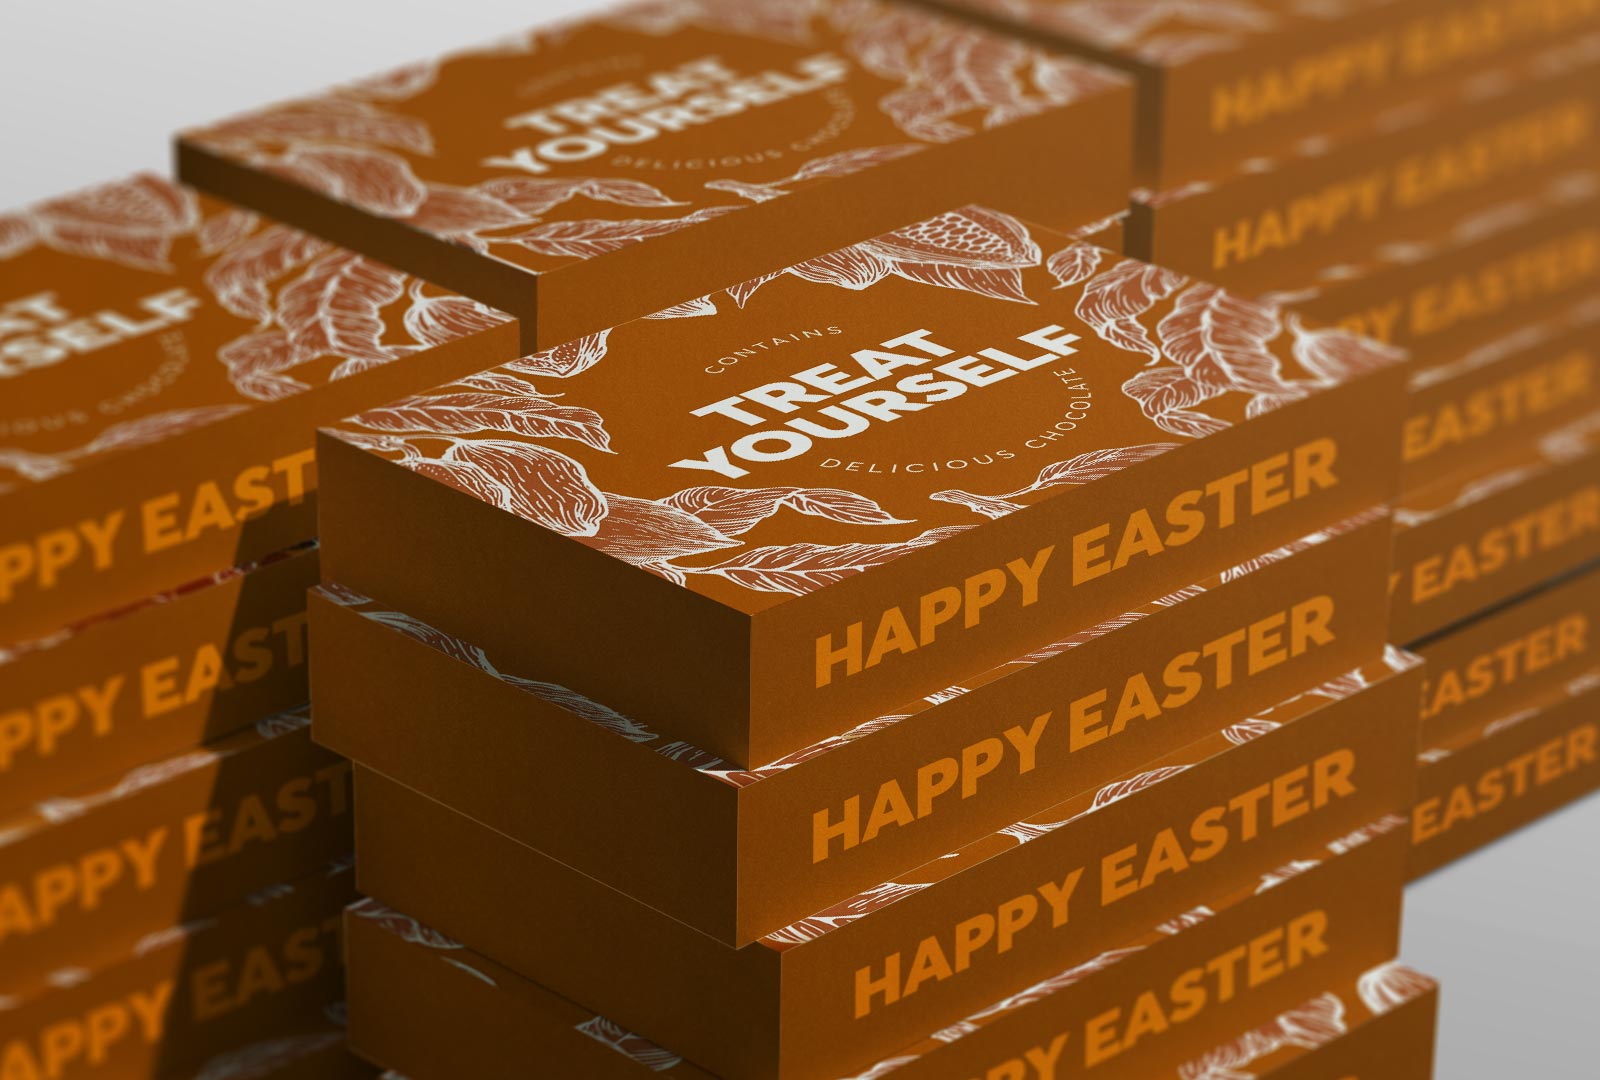 Easter hampers for employee engagement initiatives for corporates, delivered by I-Tel Group